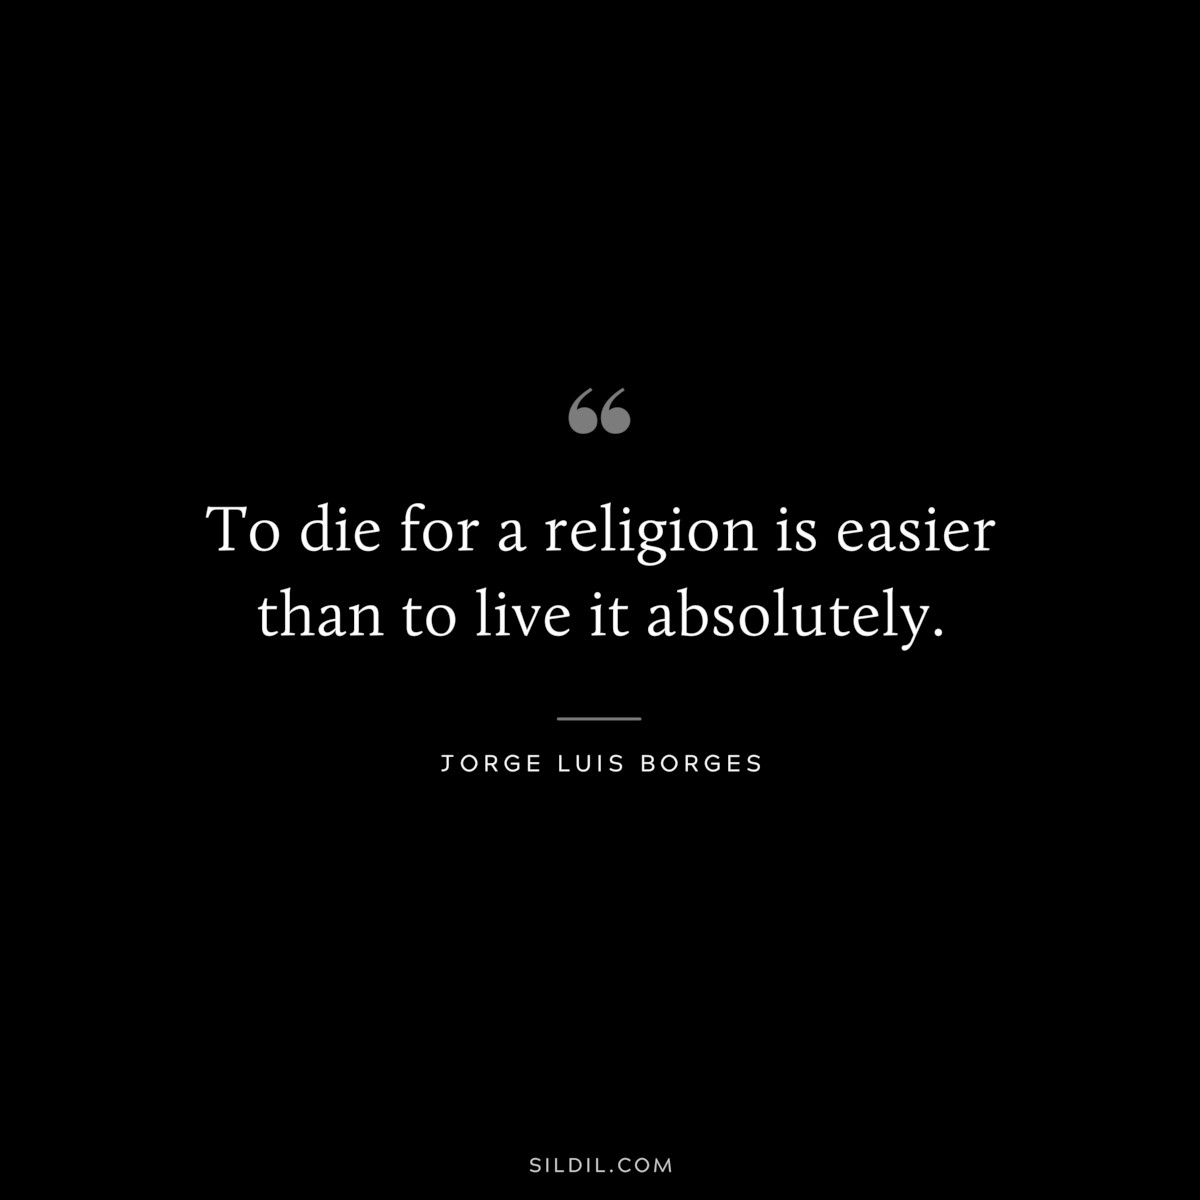 To die for a religion is easier than to live it absolutely. ― Jorge Luis Borges